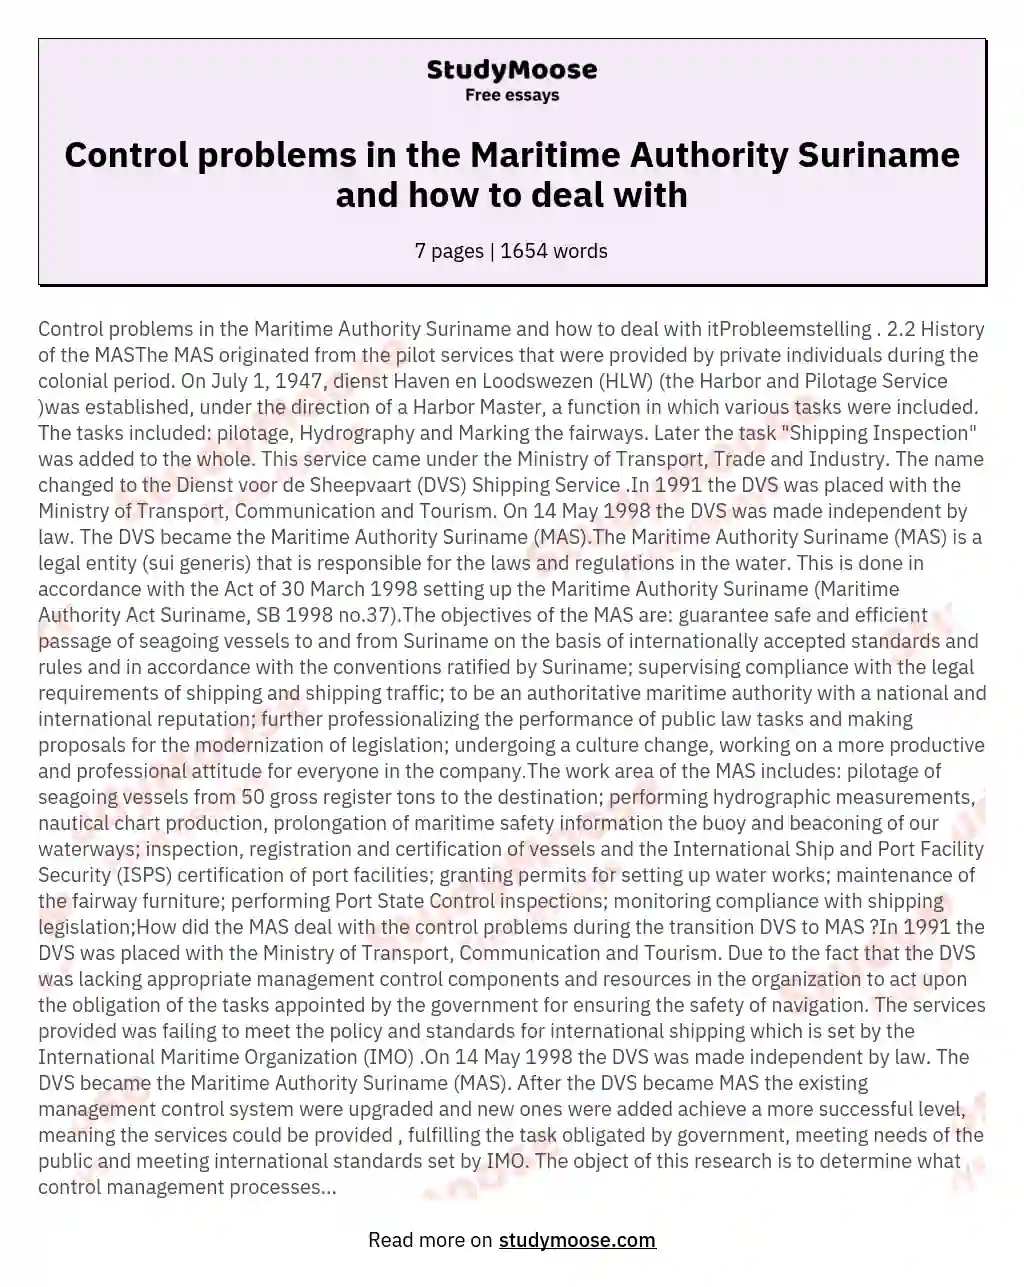 Control problems in the Maritime Authority Suriname and how to deal with essay